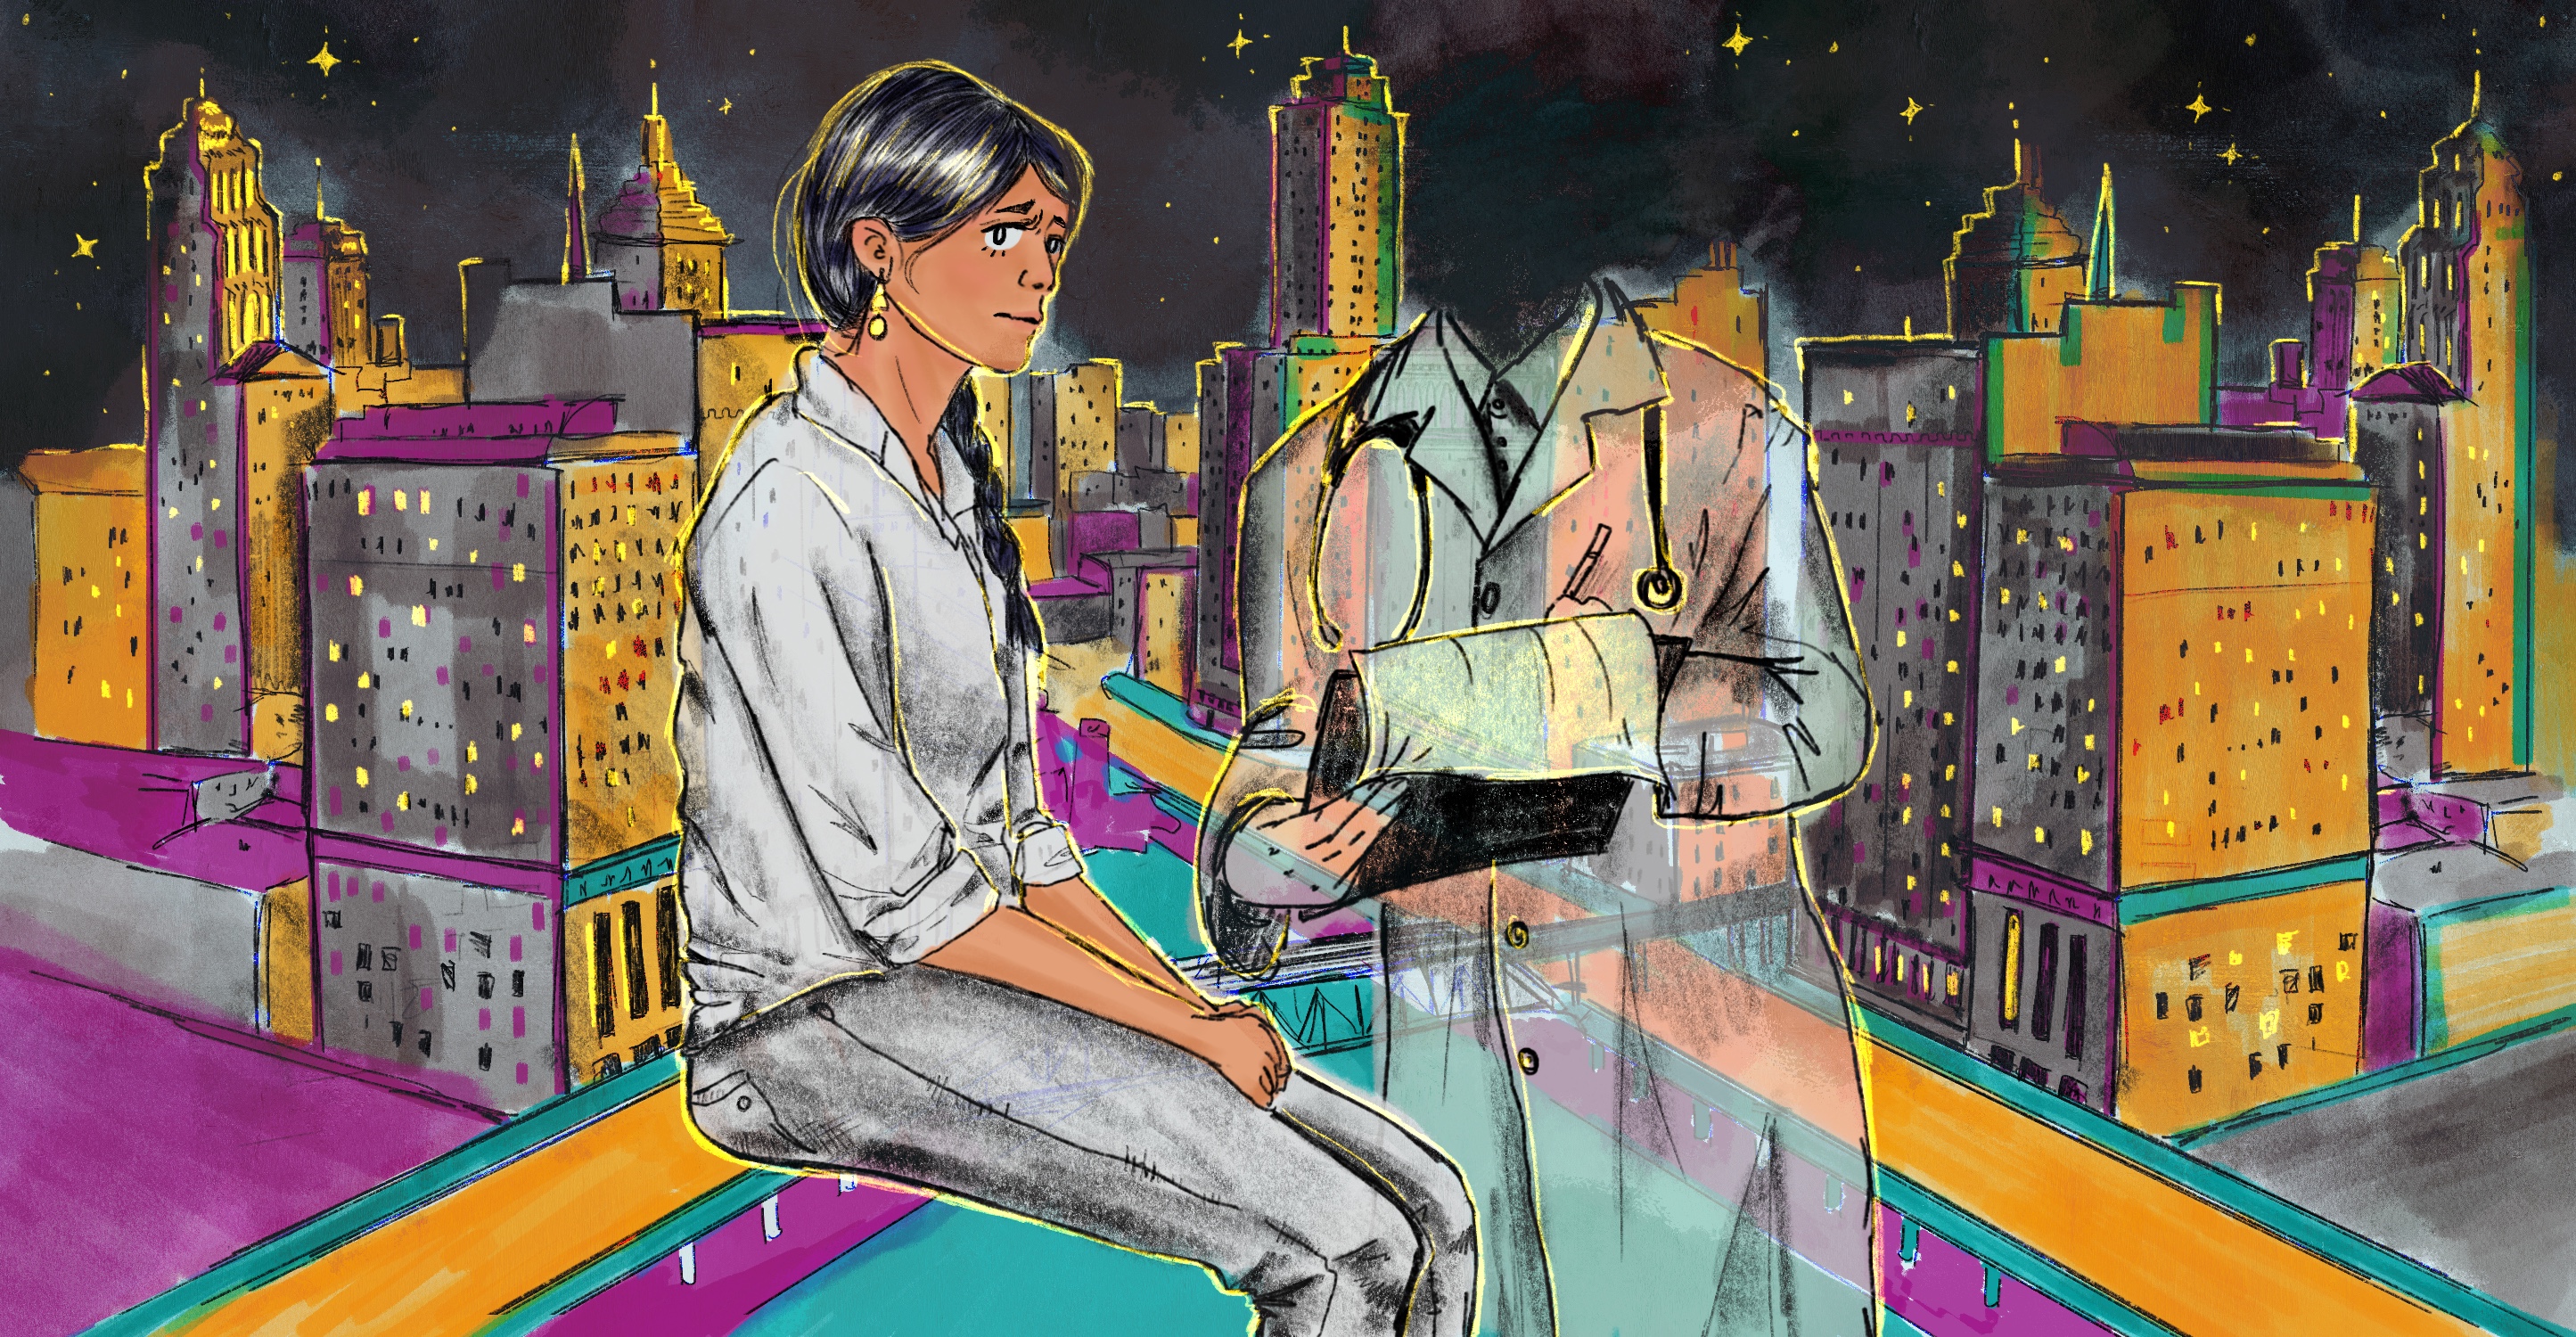 A digital illustration in watercolor and pencil. A woman with long, braided black hair sits in the center of the image. She looks towards the viewer out of the corner of her eye with a slightly concerned expression. Beside her is a doctor, whose body is transparent and face has completely faded into the background. Behind them is an urban landscape with buildings colored in magenta, yellow, and grey. It is night.